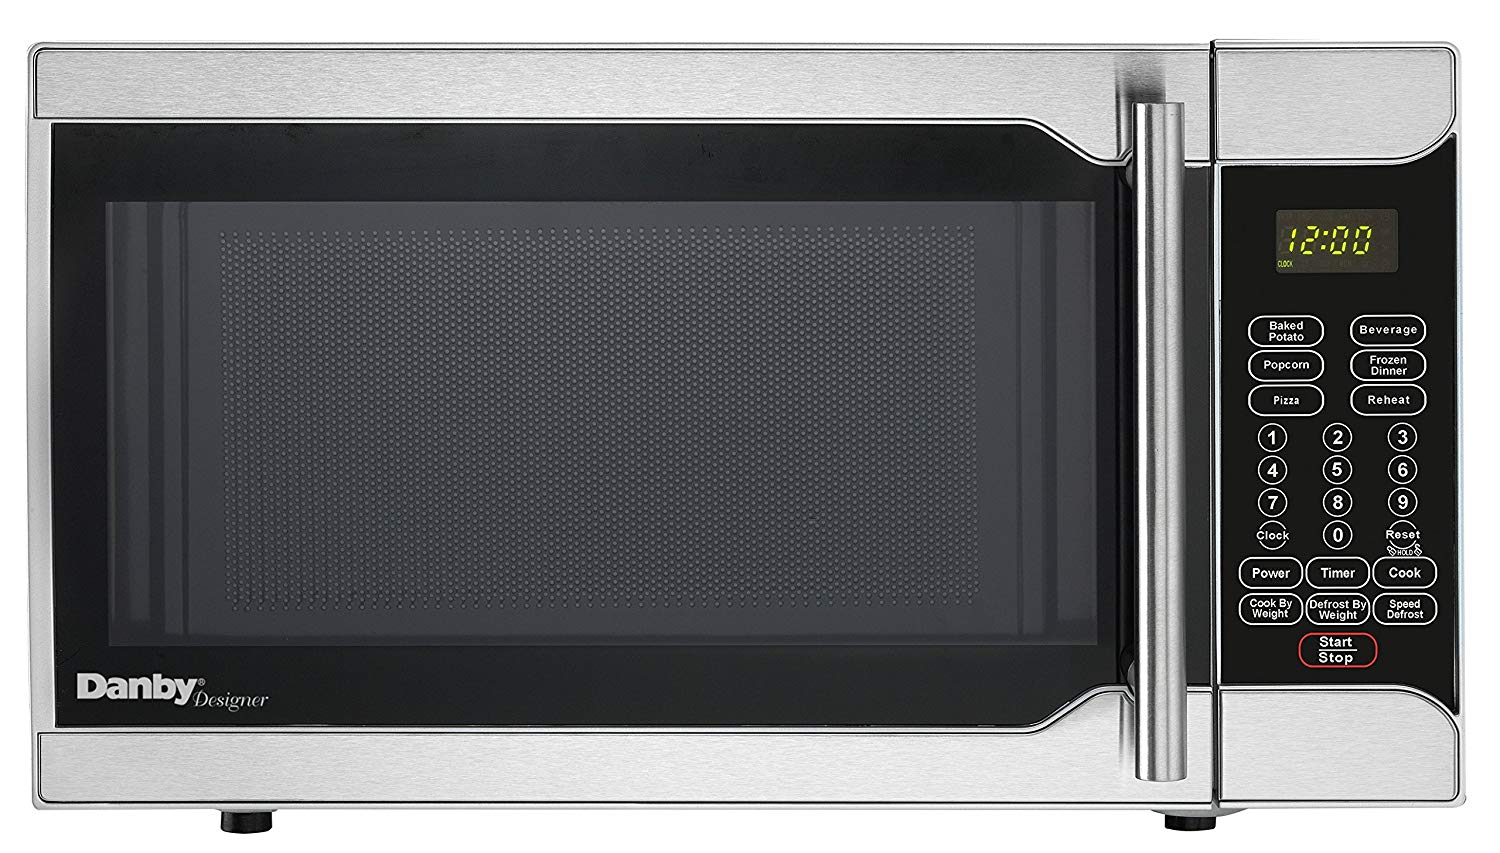 Danby Designer 0.7 Cu. Ft. 700W Countertop Microwave Oven in Stainless Steel